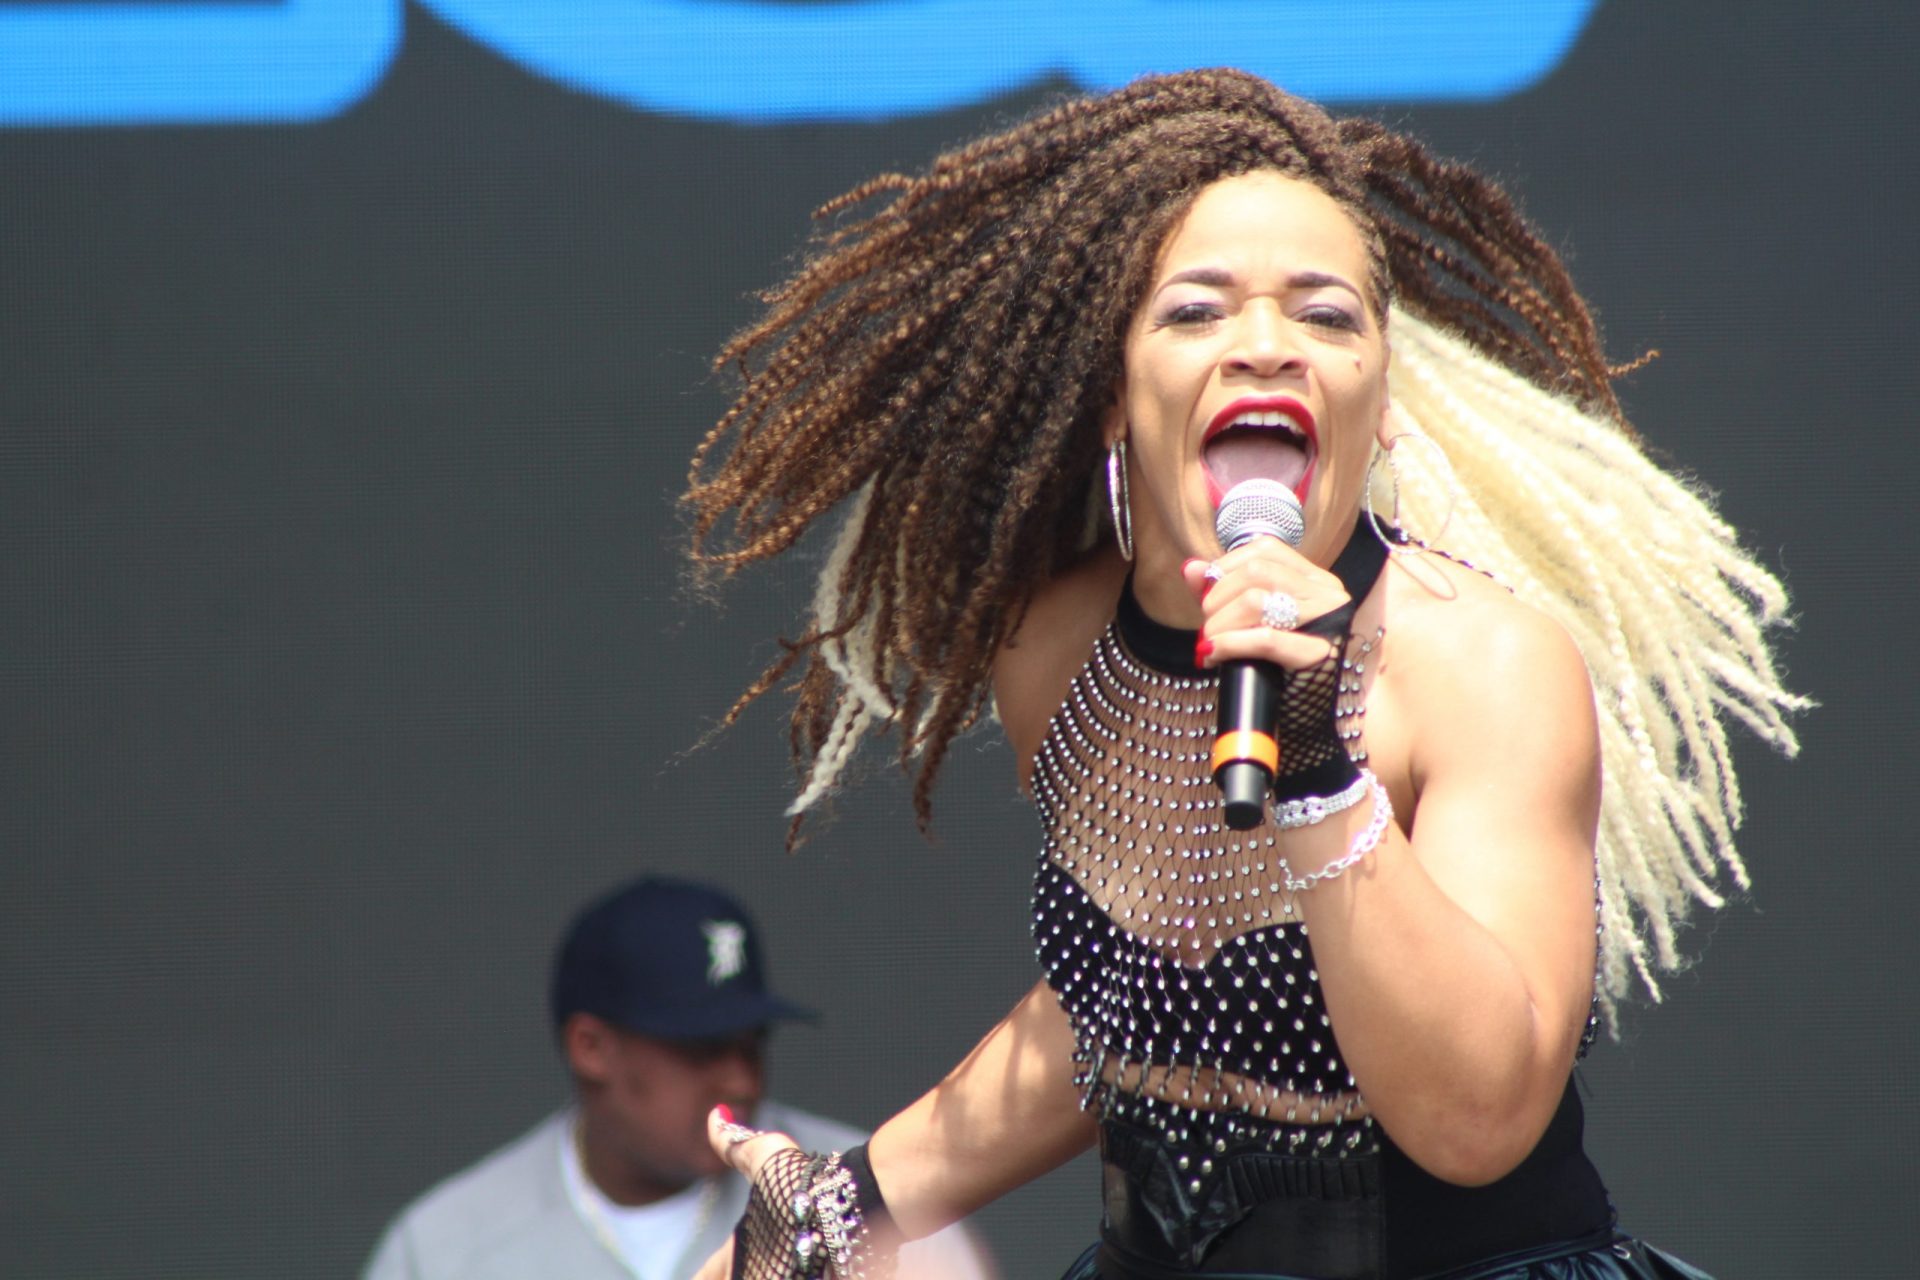 Local music was the star at this year's Lollapalooza (photos)